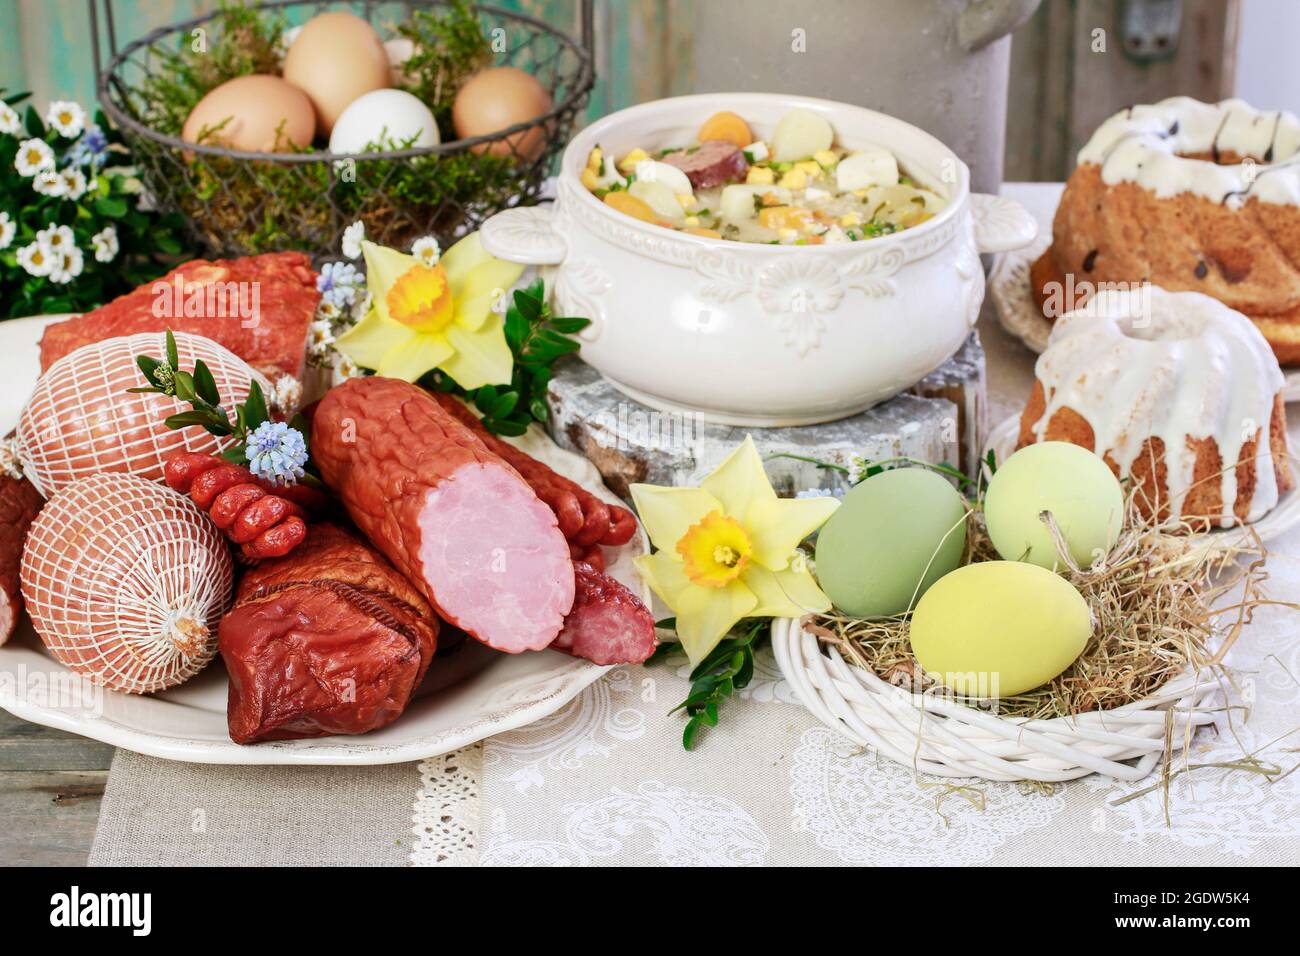 The sour rye soup, easter cakes and saussages on the table. Festive breakfast Stock Photo